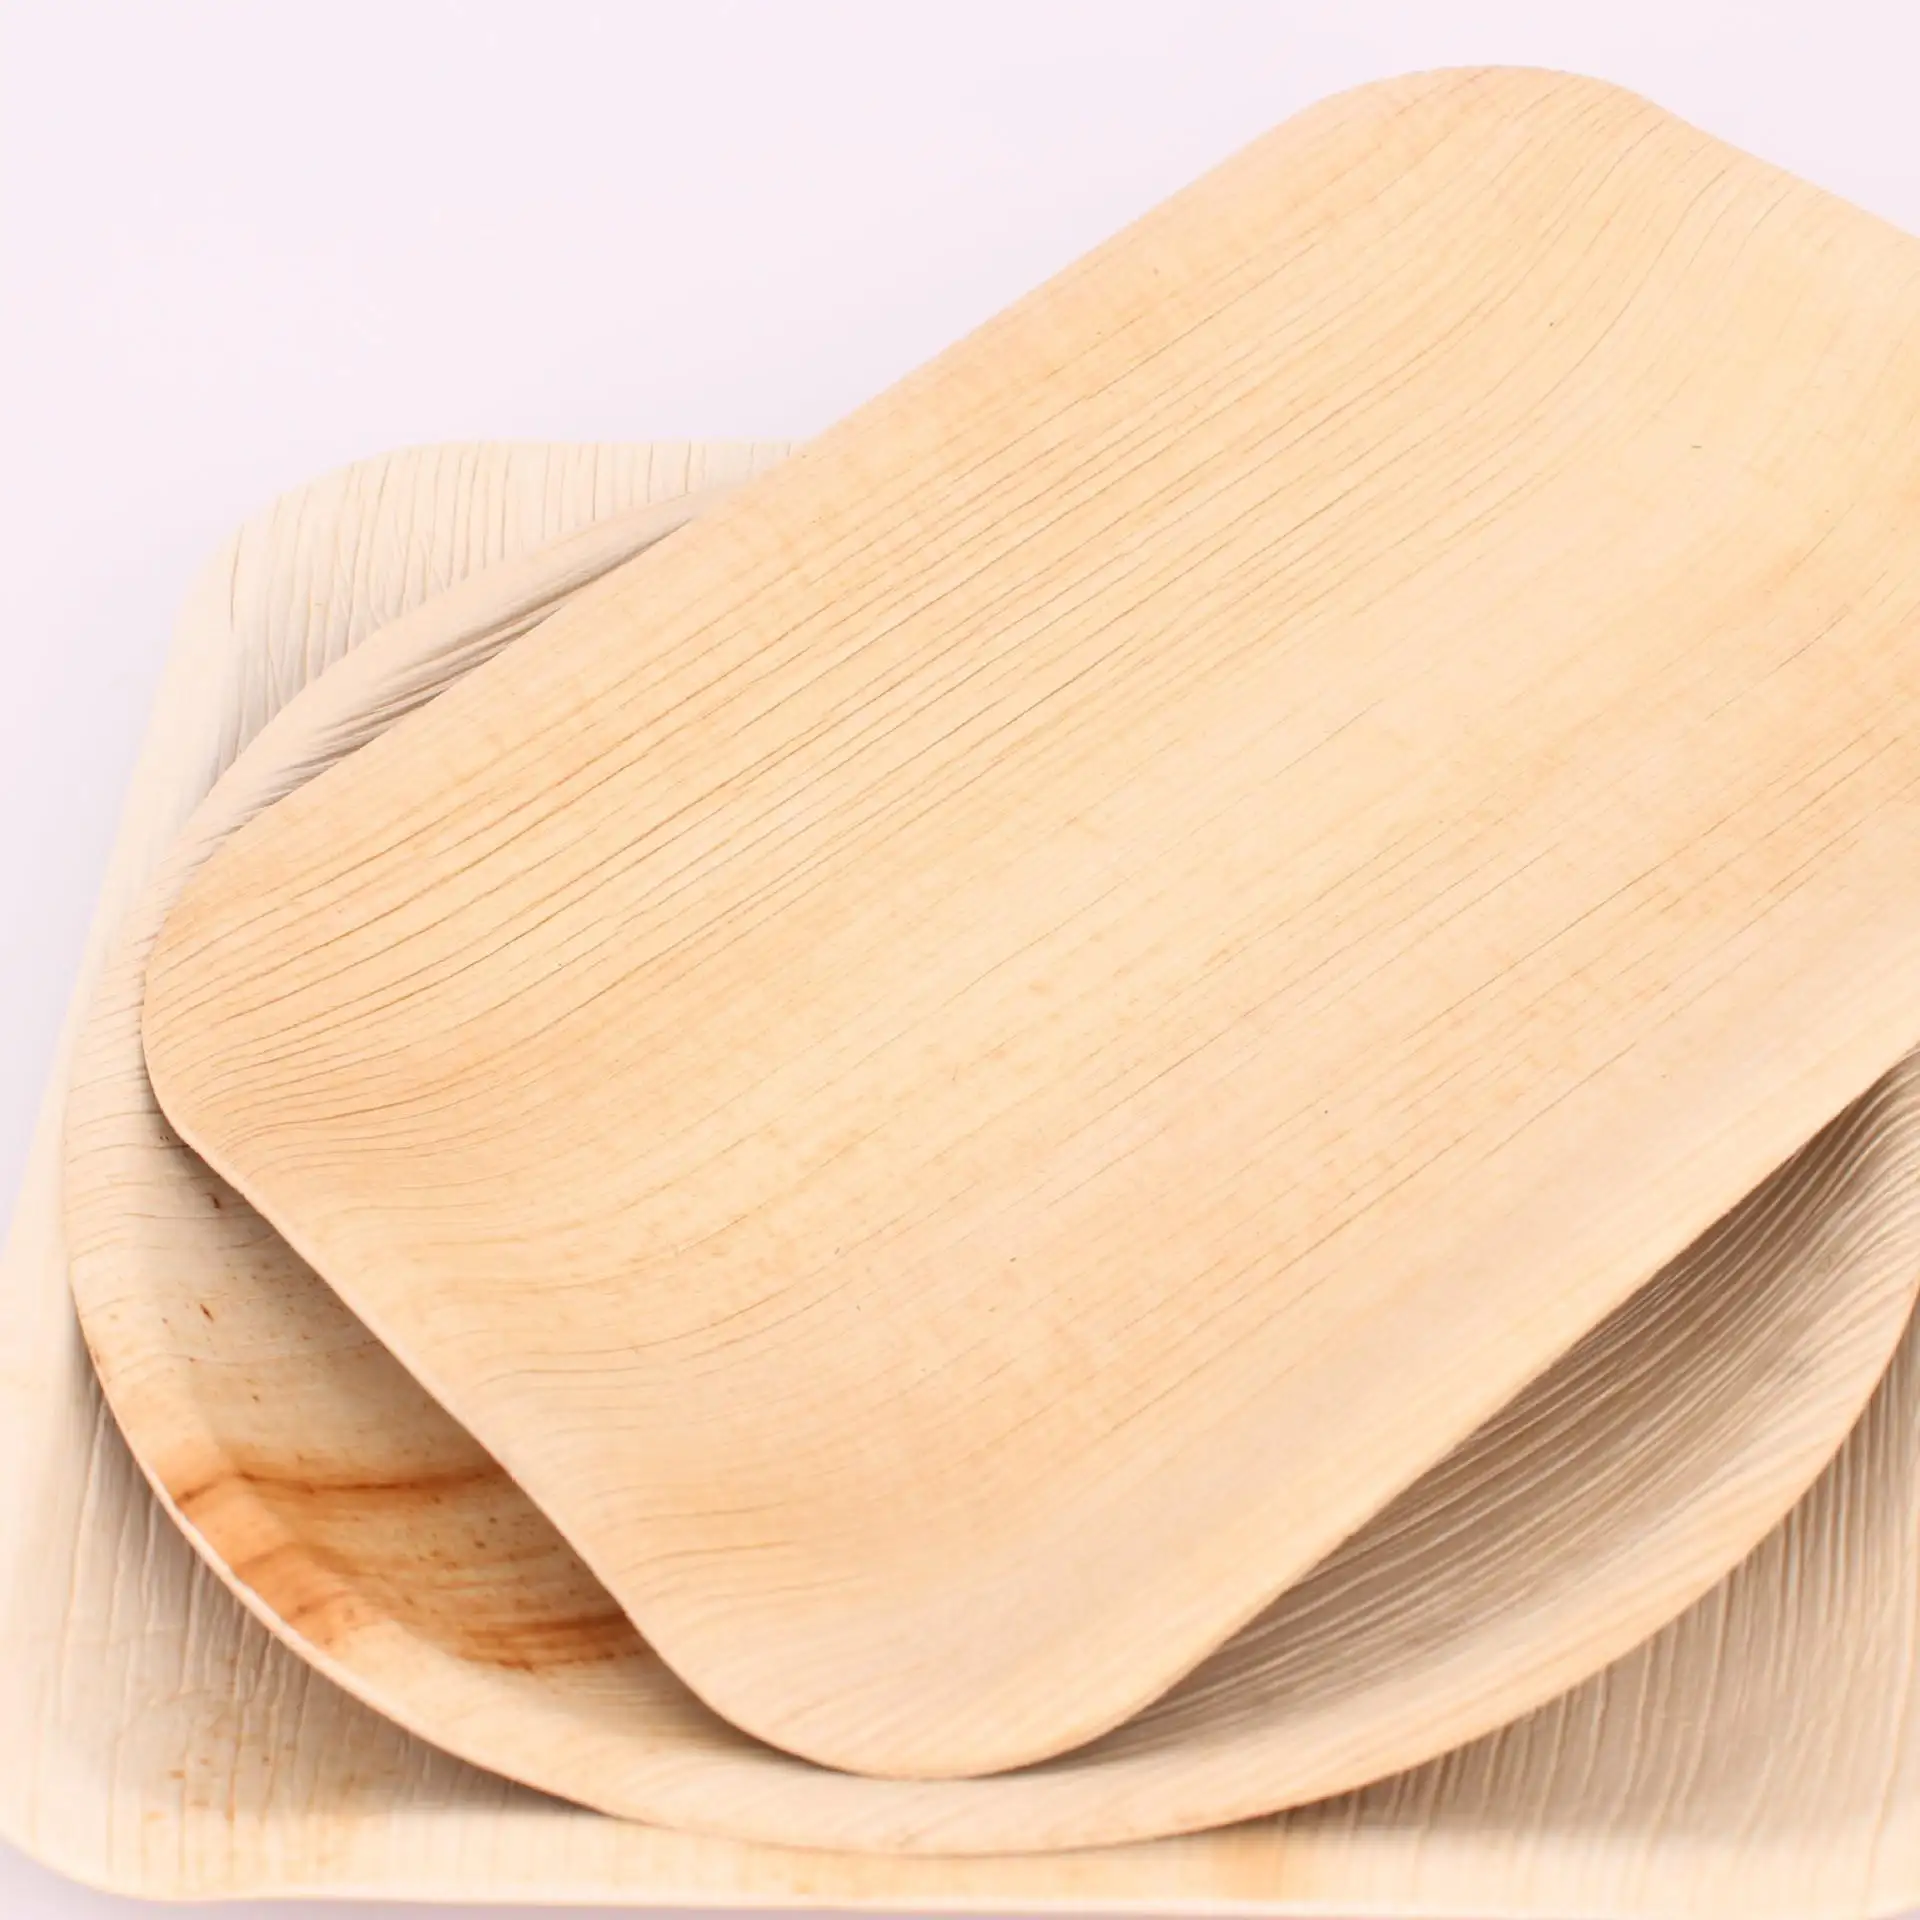 Walmart Hot Selling Plates bowls trays Eco friendly Areca Palm Leaf tableware for Babyshower BBQ Picnic from Direct Manufacturer